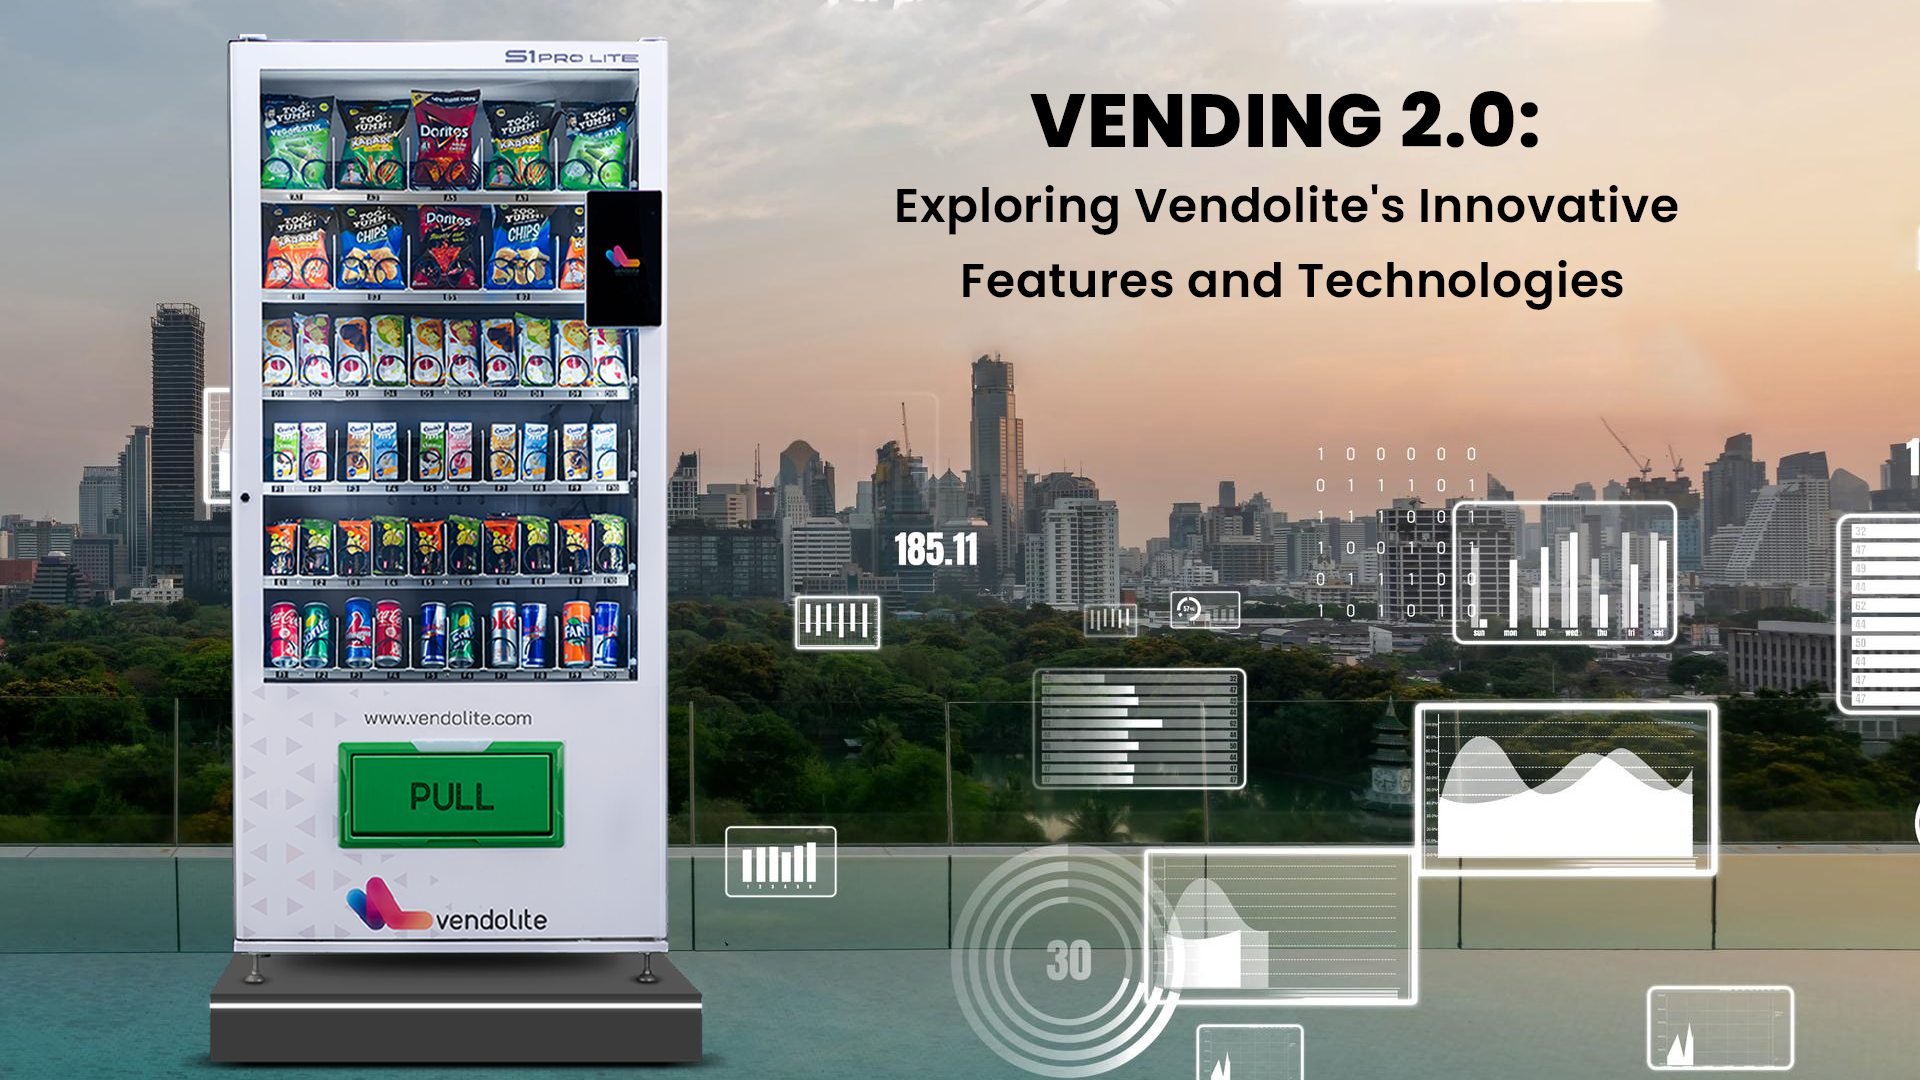 Vending 2.0: Exploring Vendolite's Innovative Features and Technologies